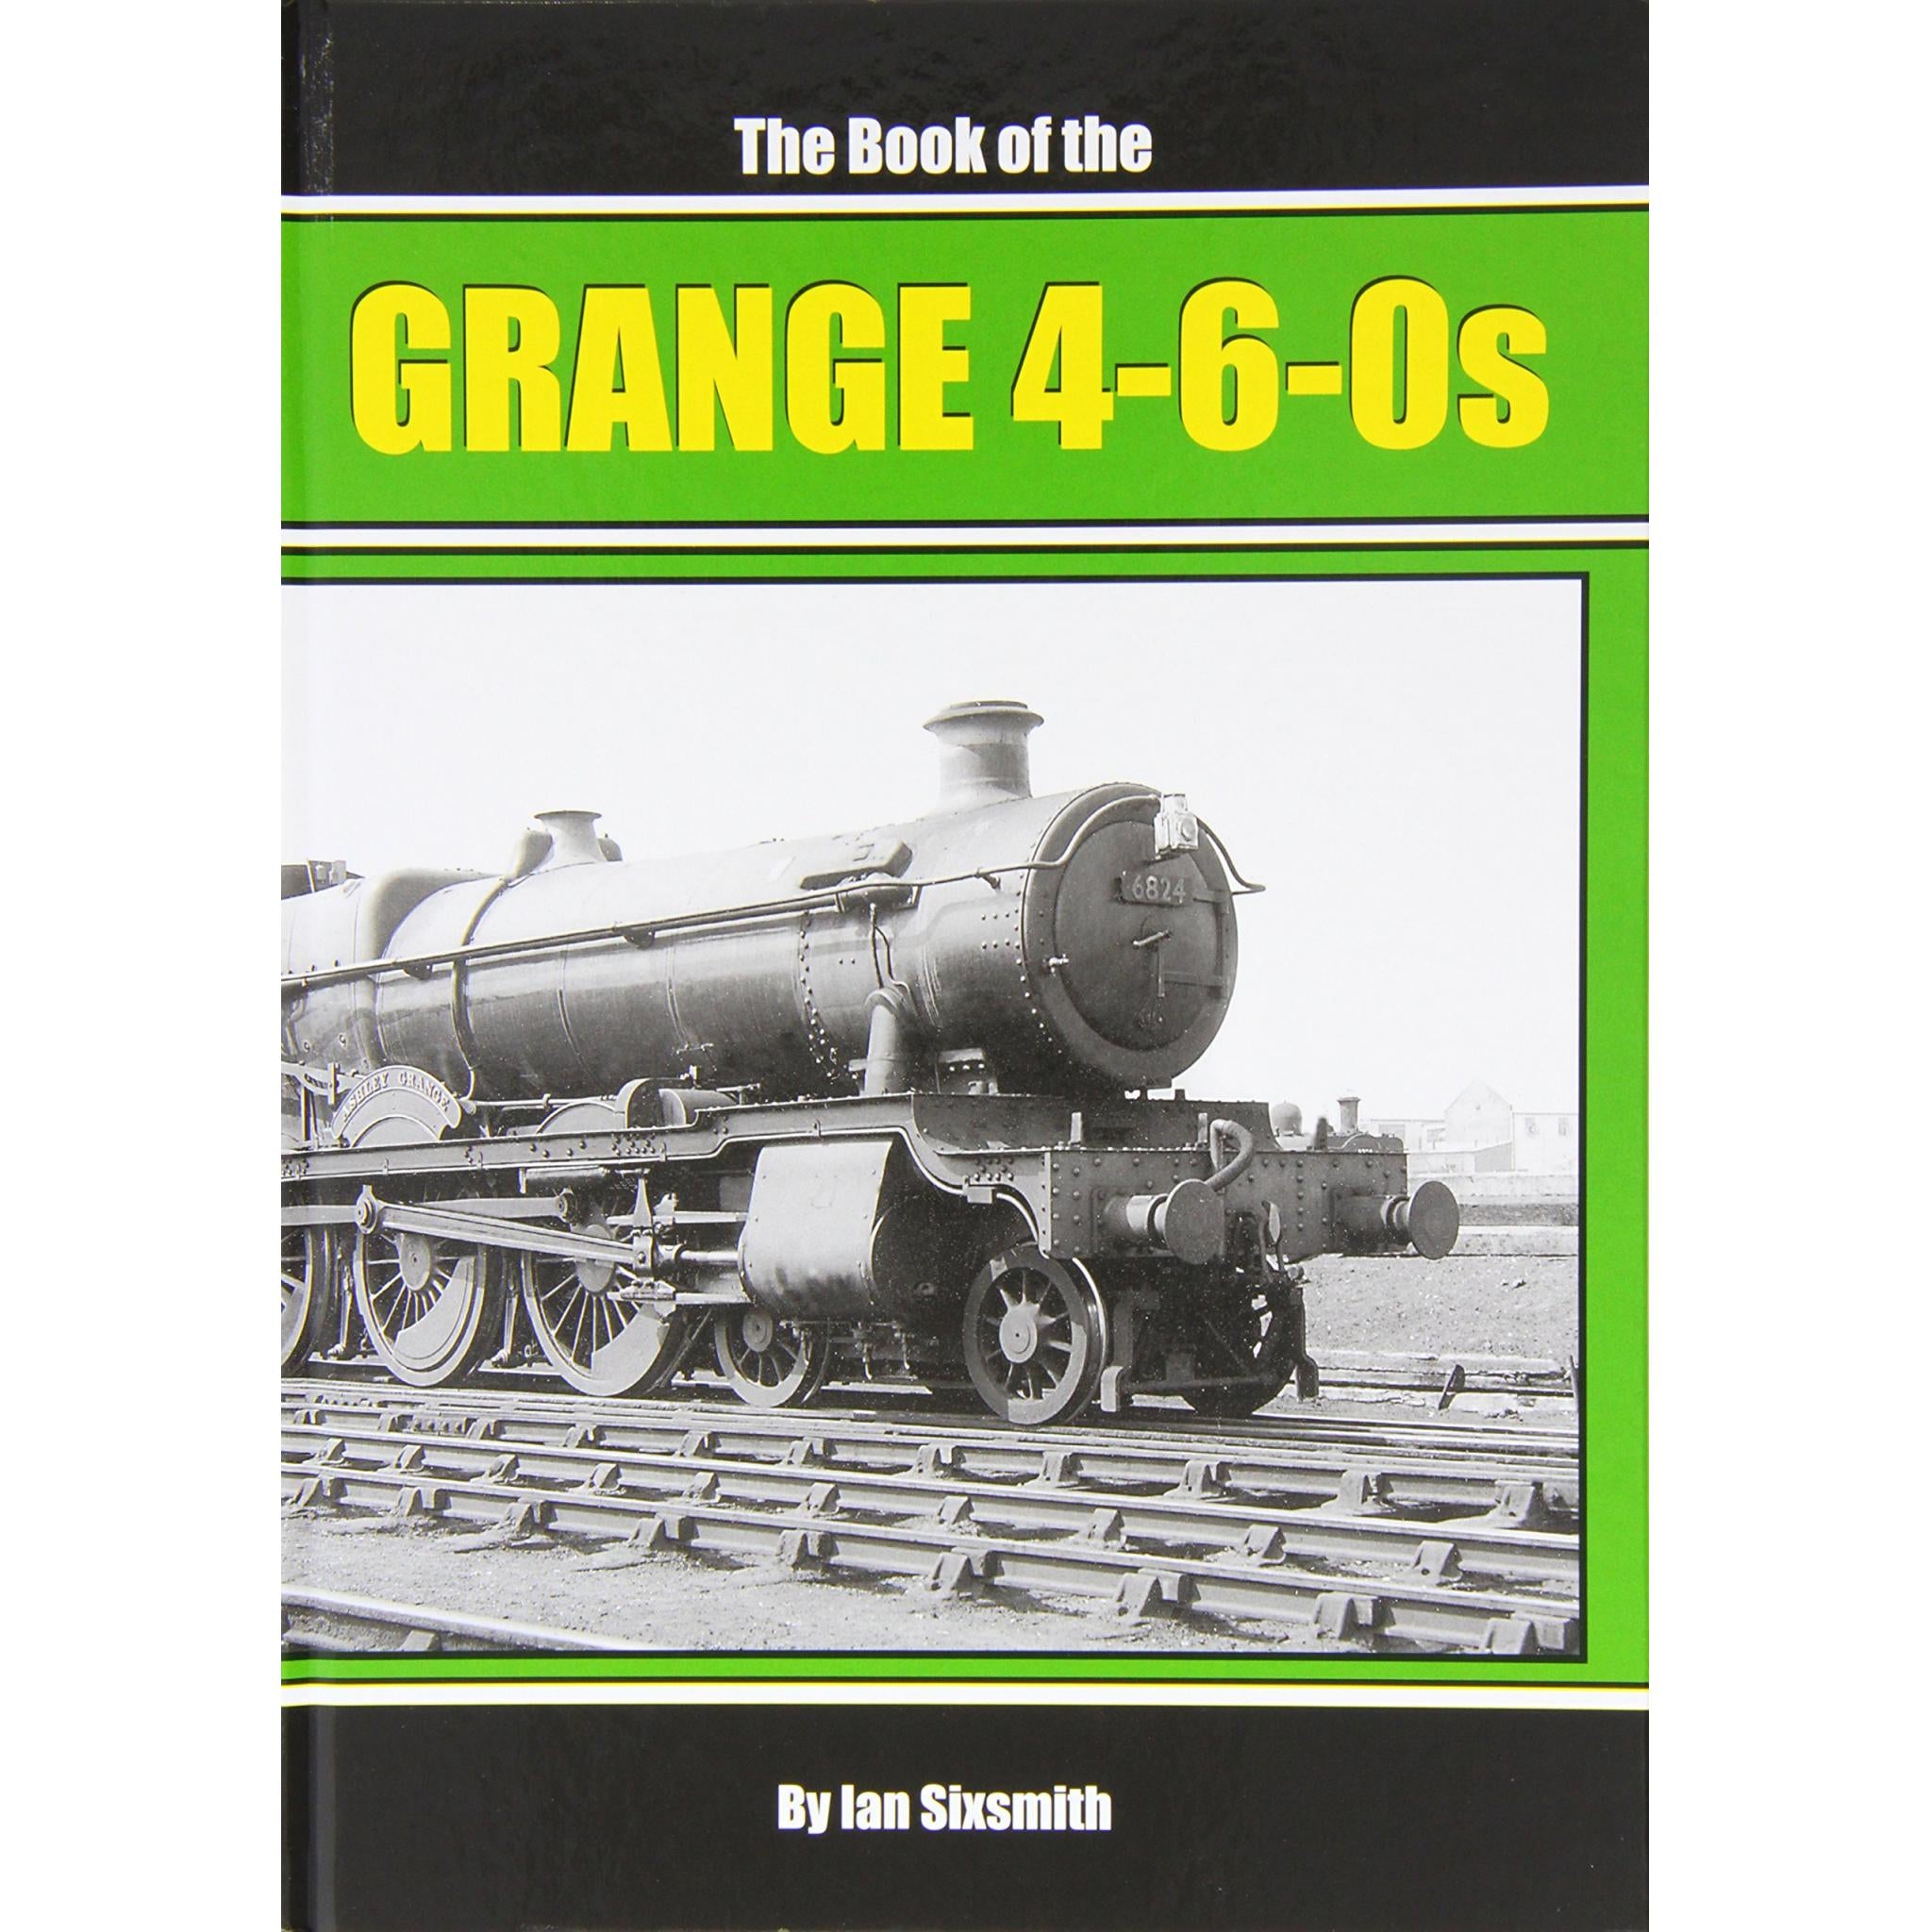 The Book of the GRANGE 4-6-0s